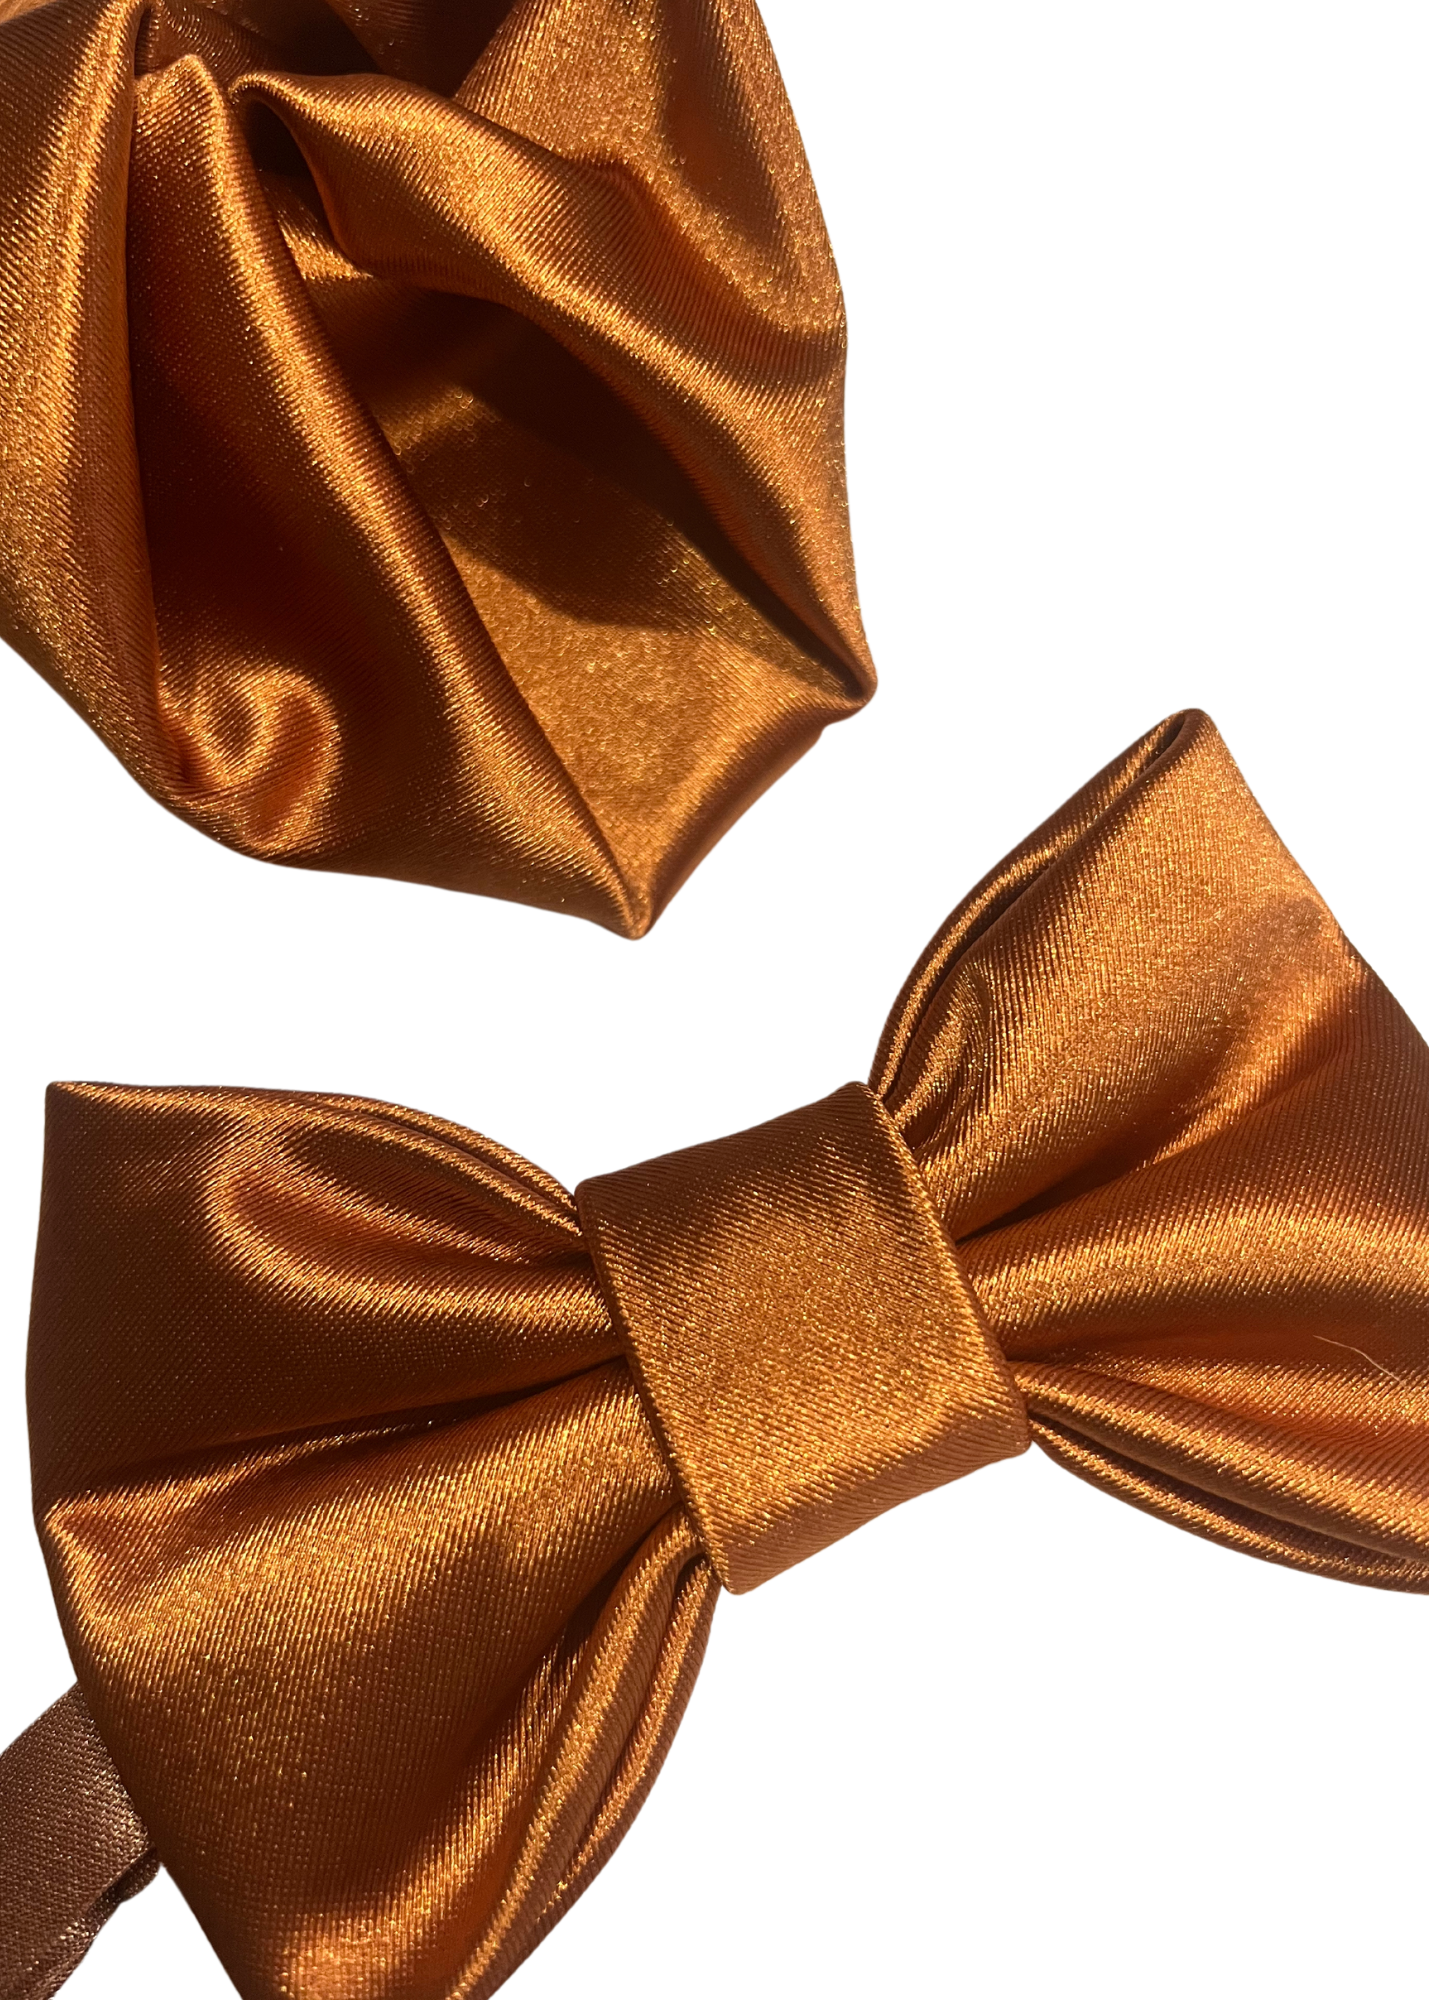 groomsmen matching bow tie and pocket square in terracotta,  matching bridesmaid color